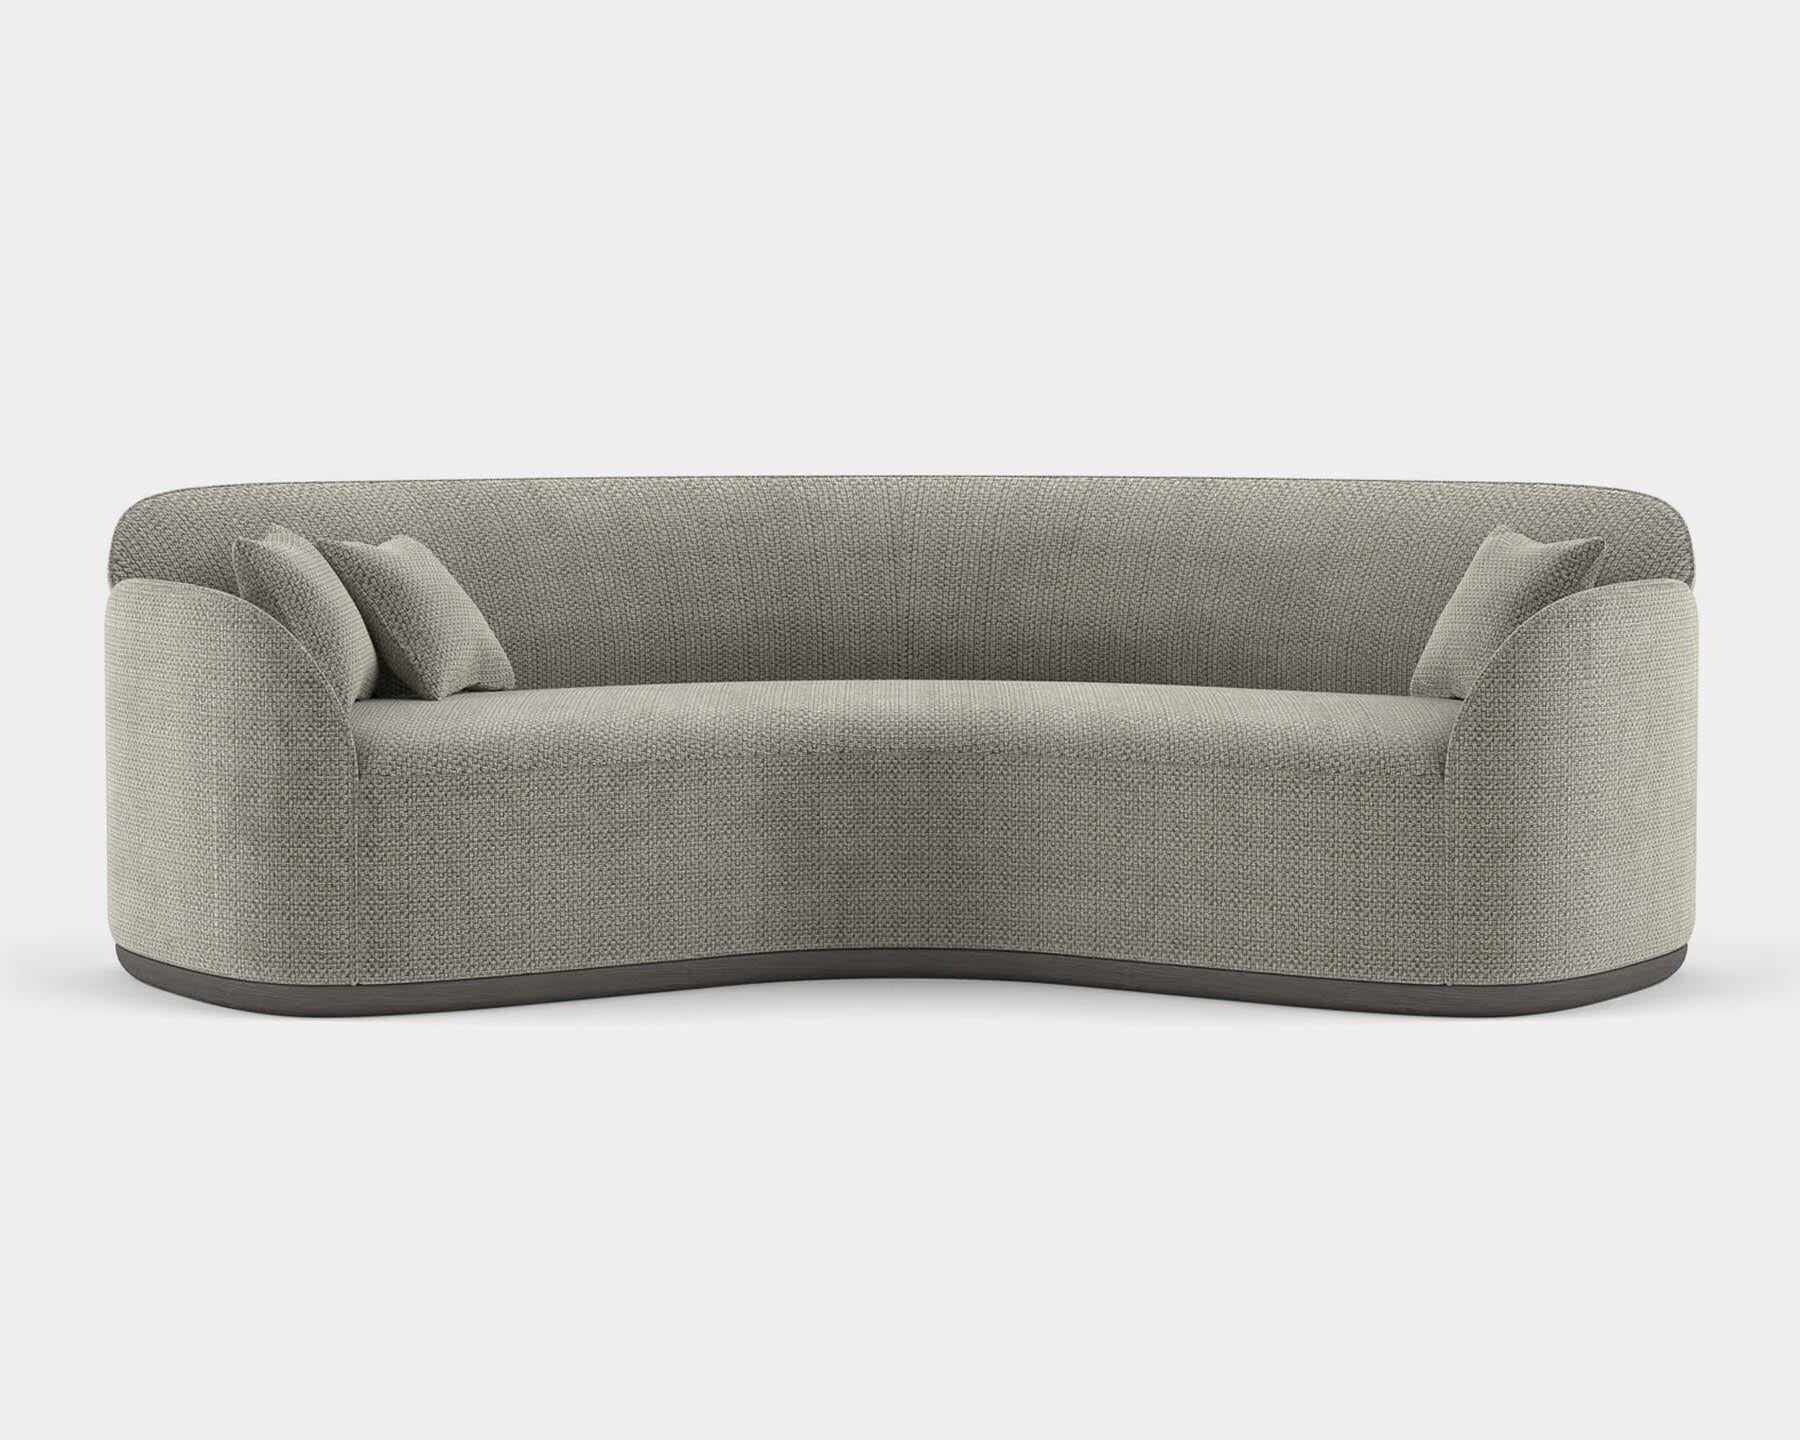 Contemporary Curved Sofa 'Unio' by Poiat, Tiger Mountain - Dedar For Sale 3